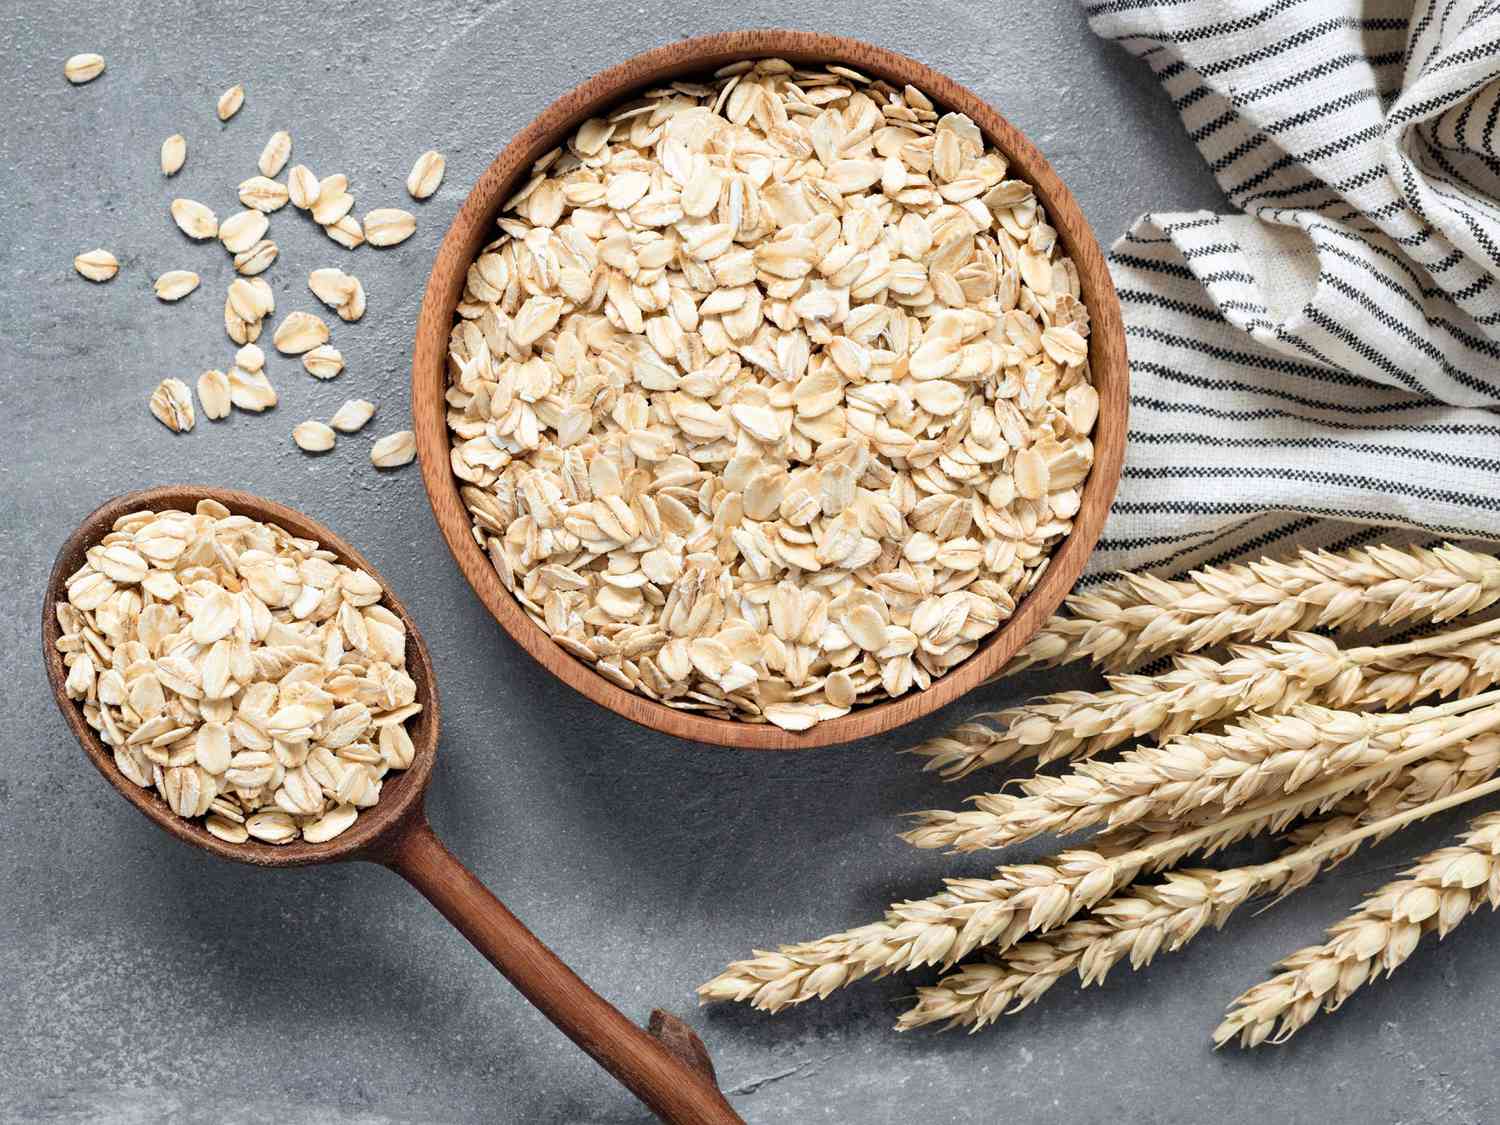 7 Delicious Ways to Eat Oats That Don't Involve Oatmeal | Real Simple